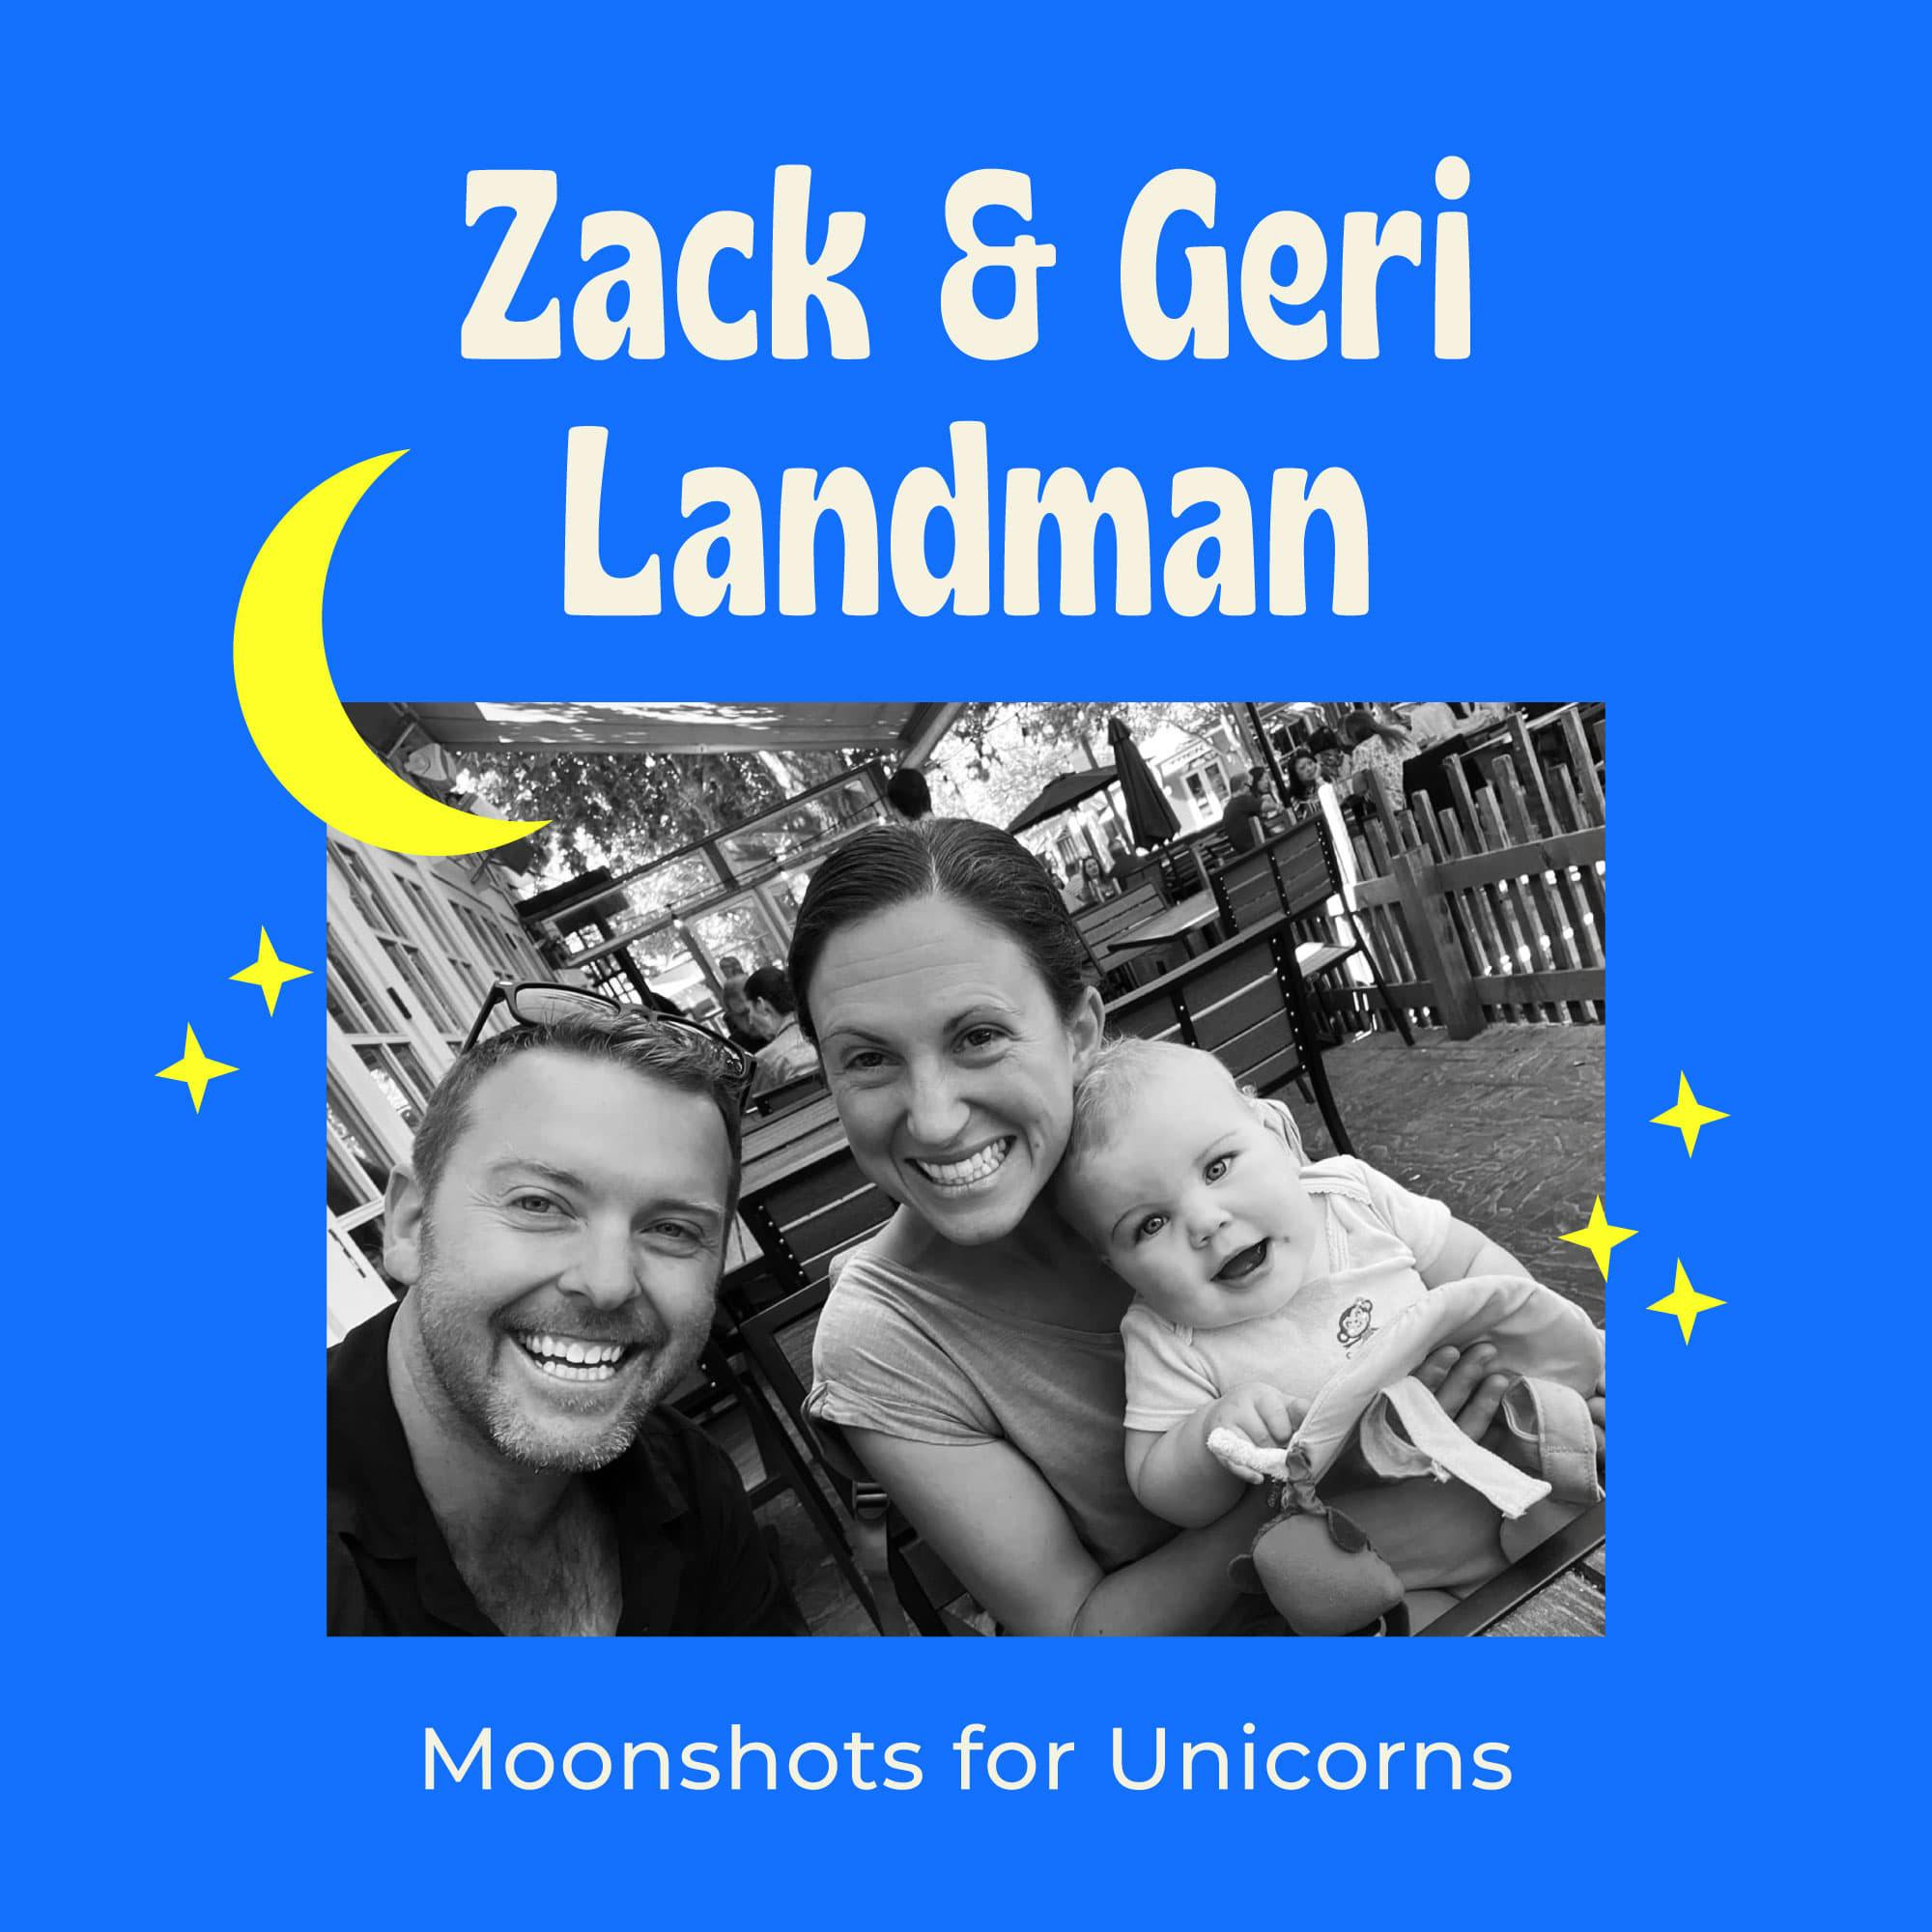 Together We Can Cure Single-Gene Disorders Starting with PGAP3 – Moonshot – An Ambitious and Innovative Project with Geri and Zach Landman